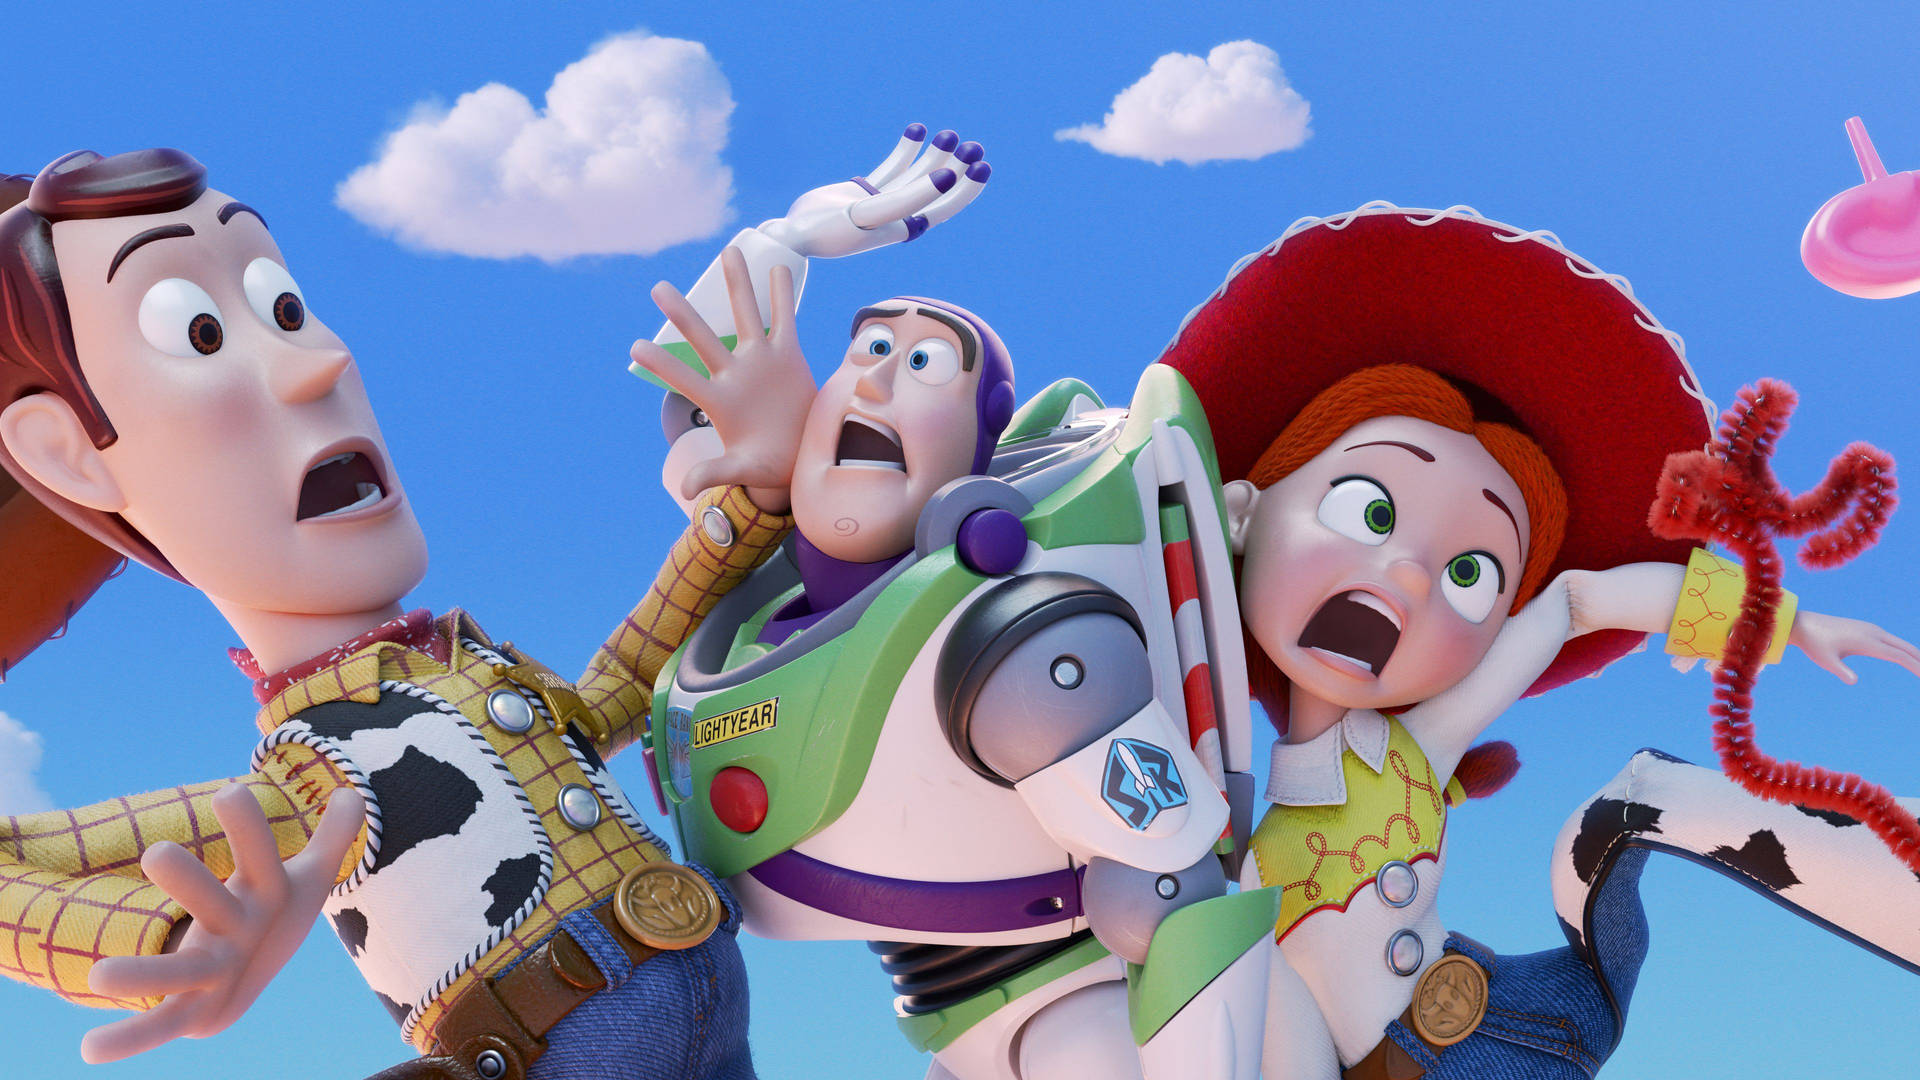 Silly Toy Story 4 Goofy Characters Wallpaper